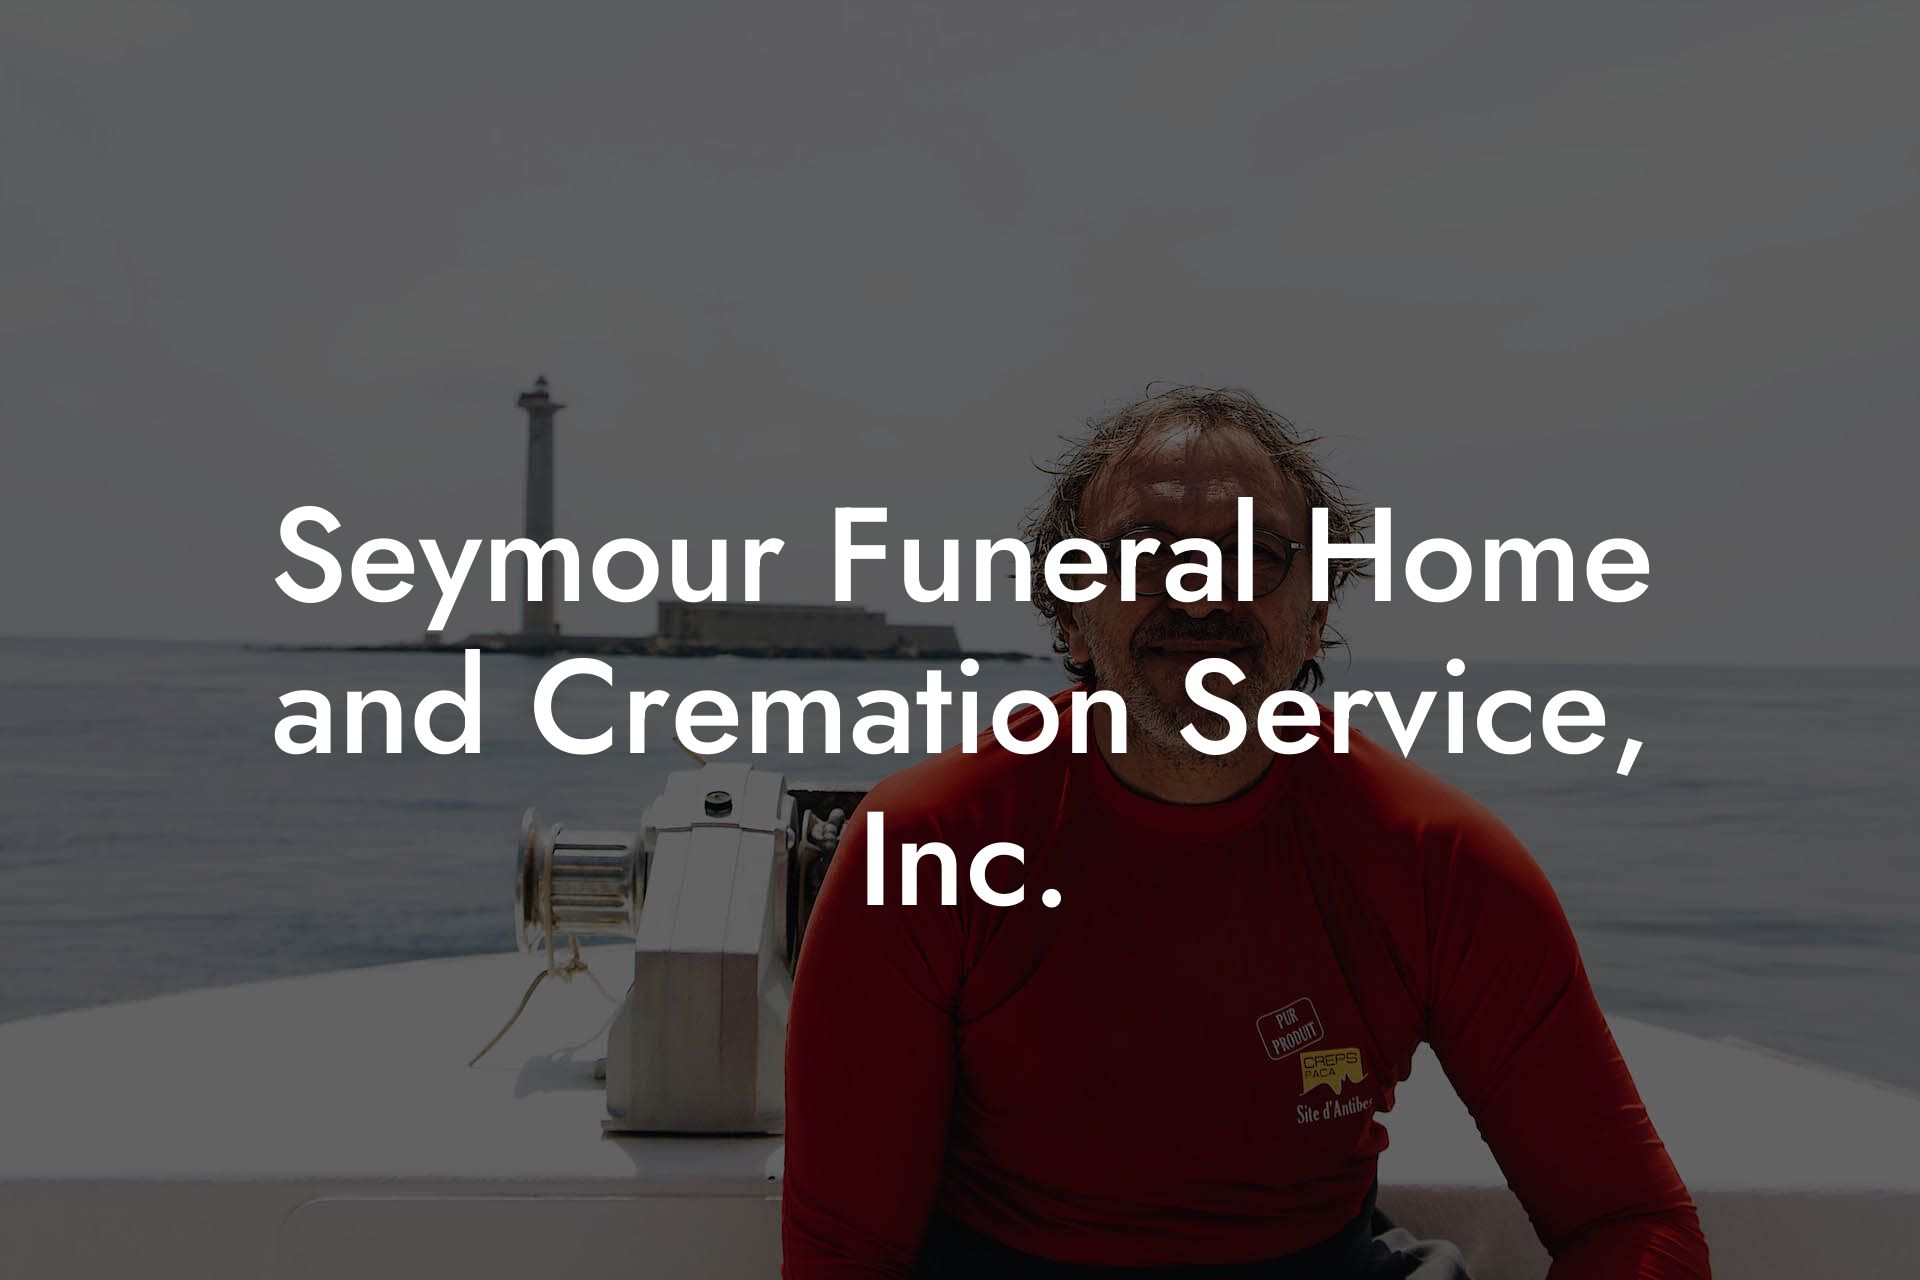 Seymour Funeral Home and Cremation Service Inc